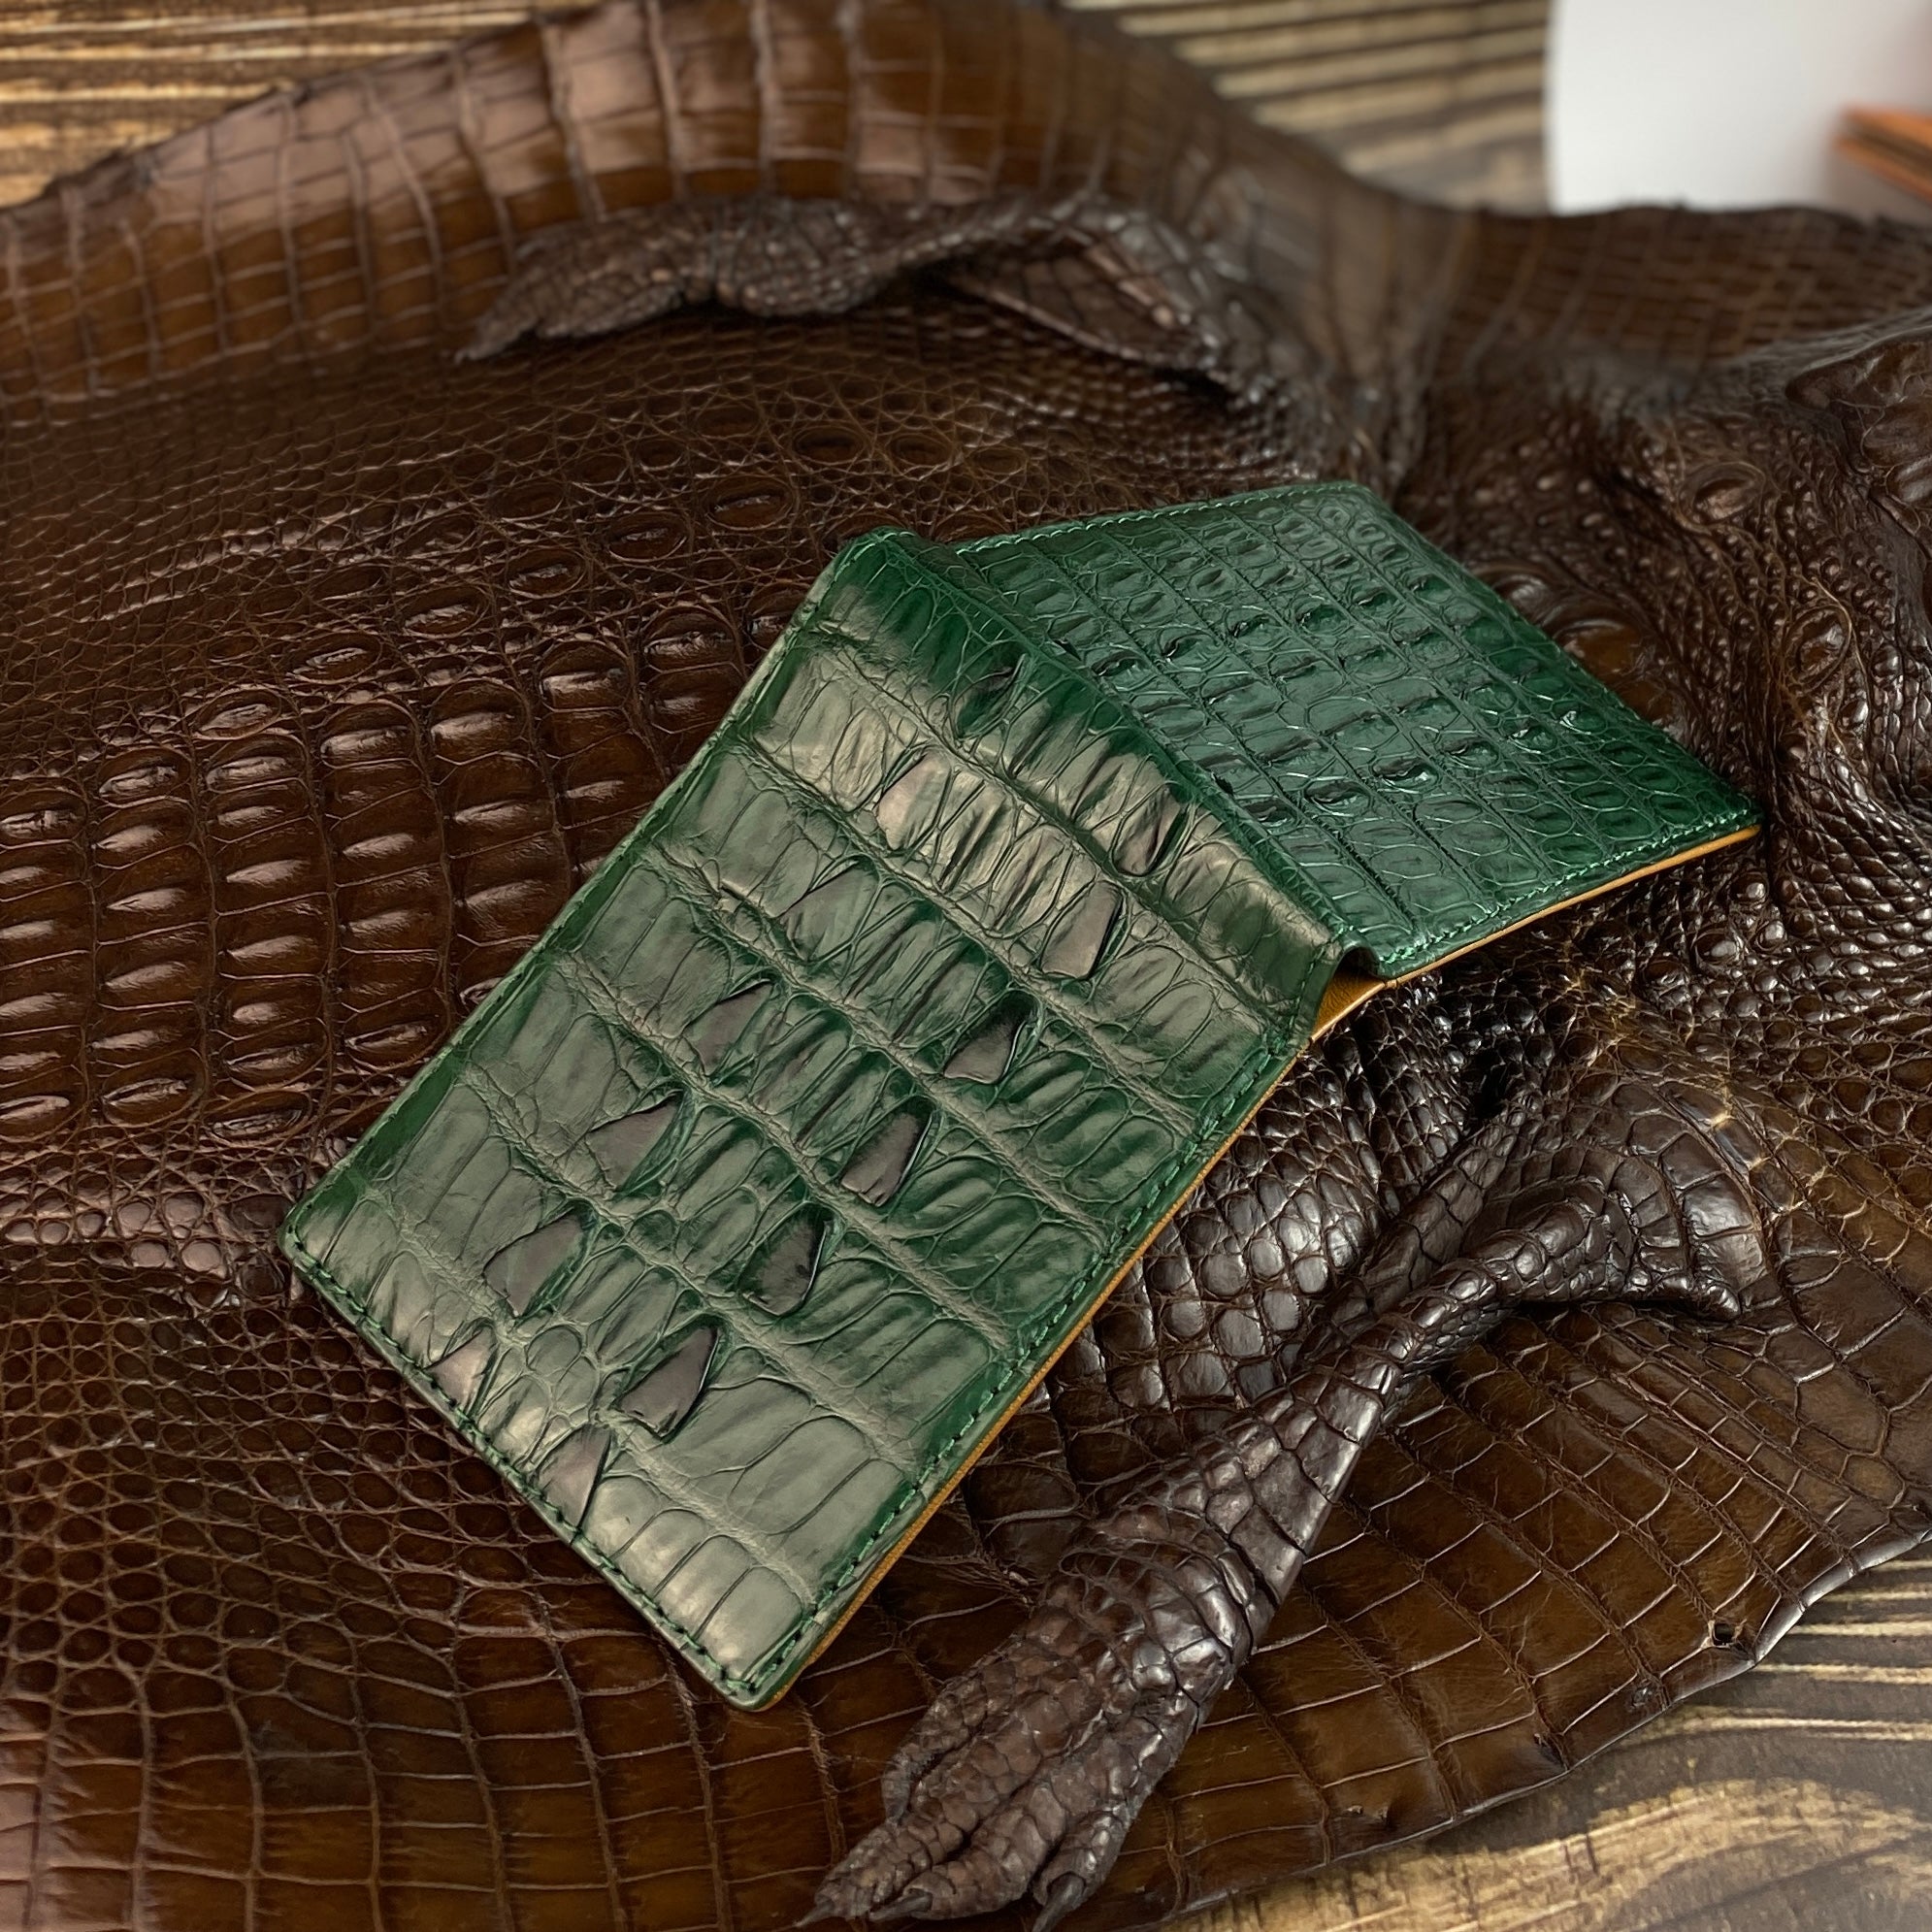 Green Alligator Tail Leather Bifold Wallet For Men